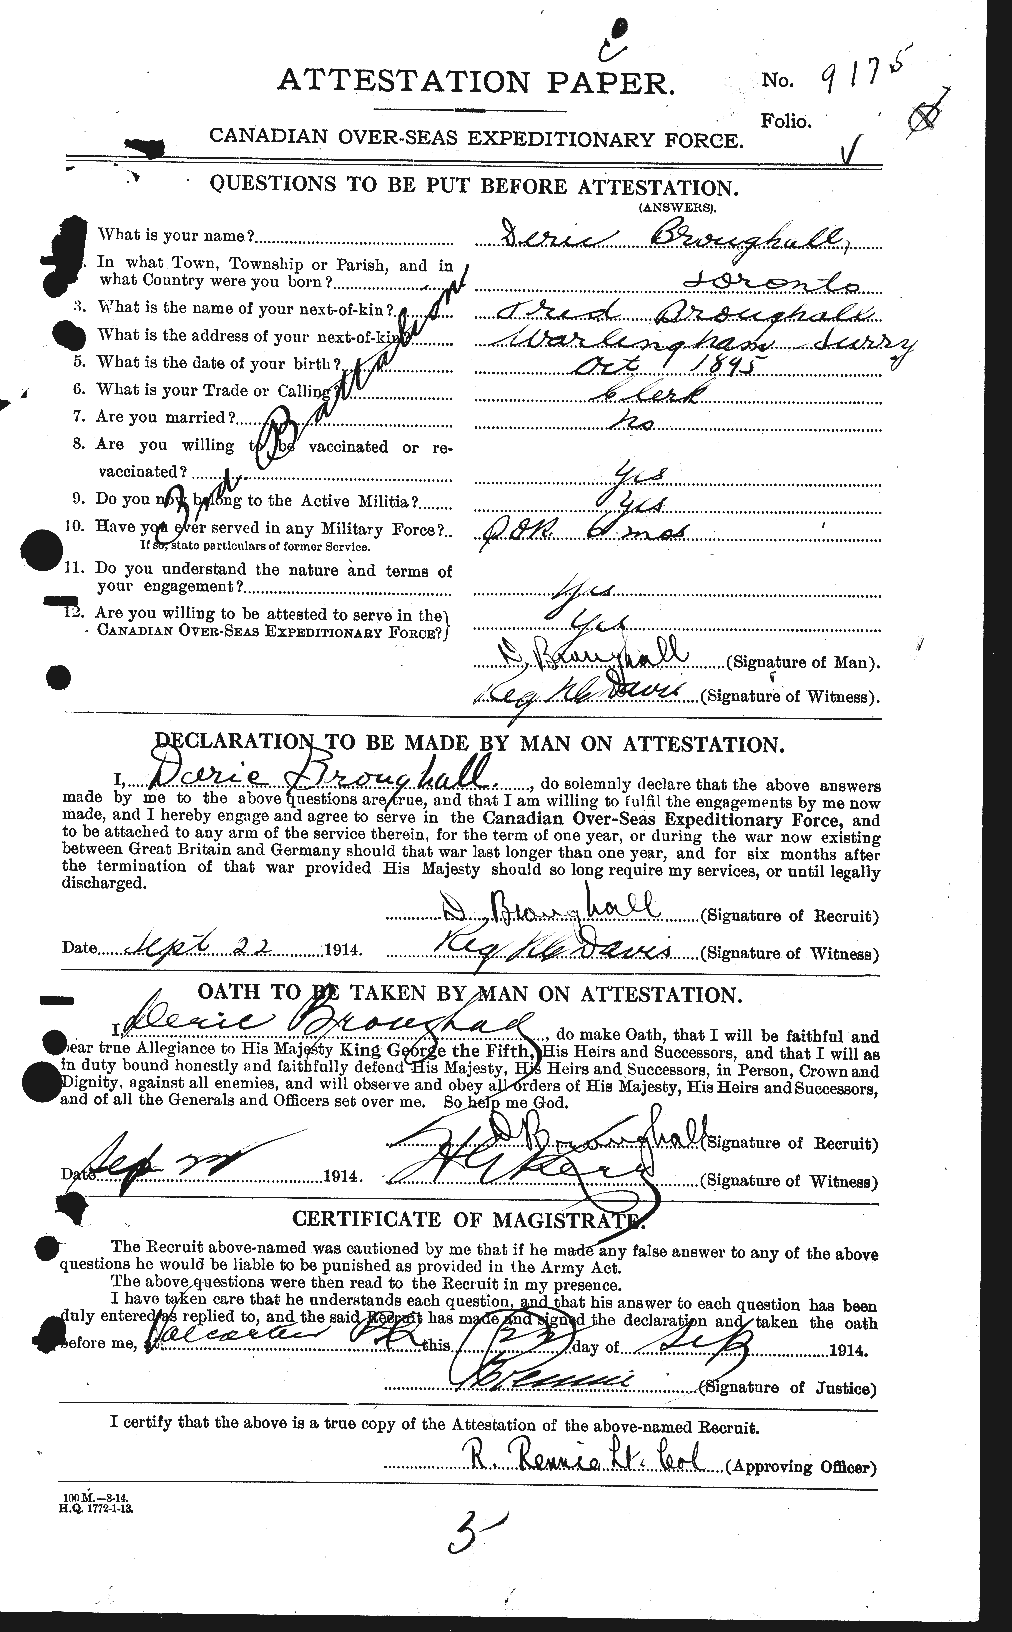 Personnel Records of the First World War - CEF 264498a